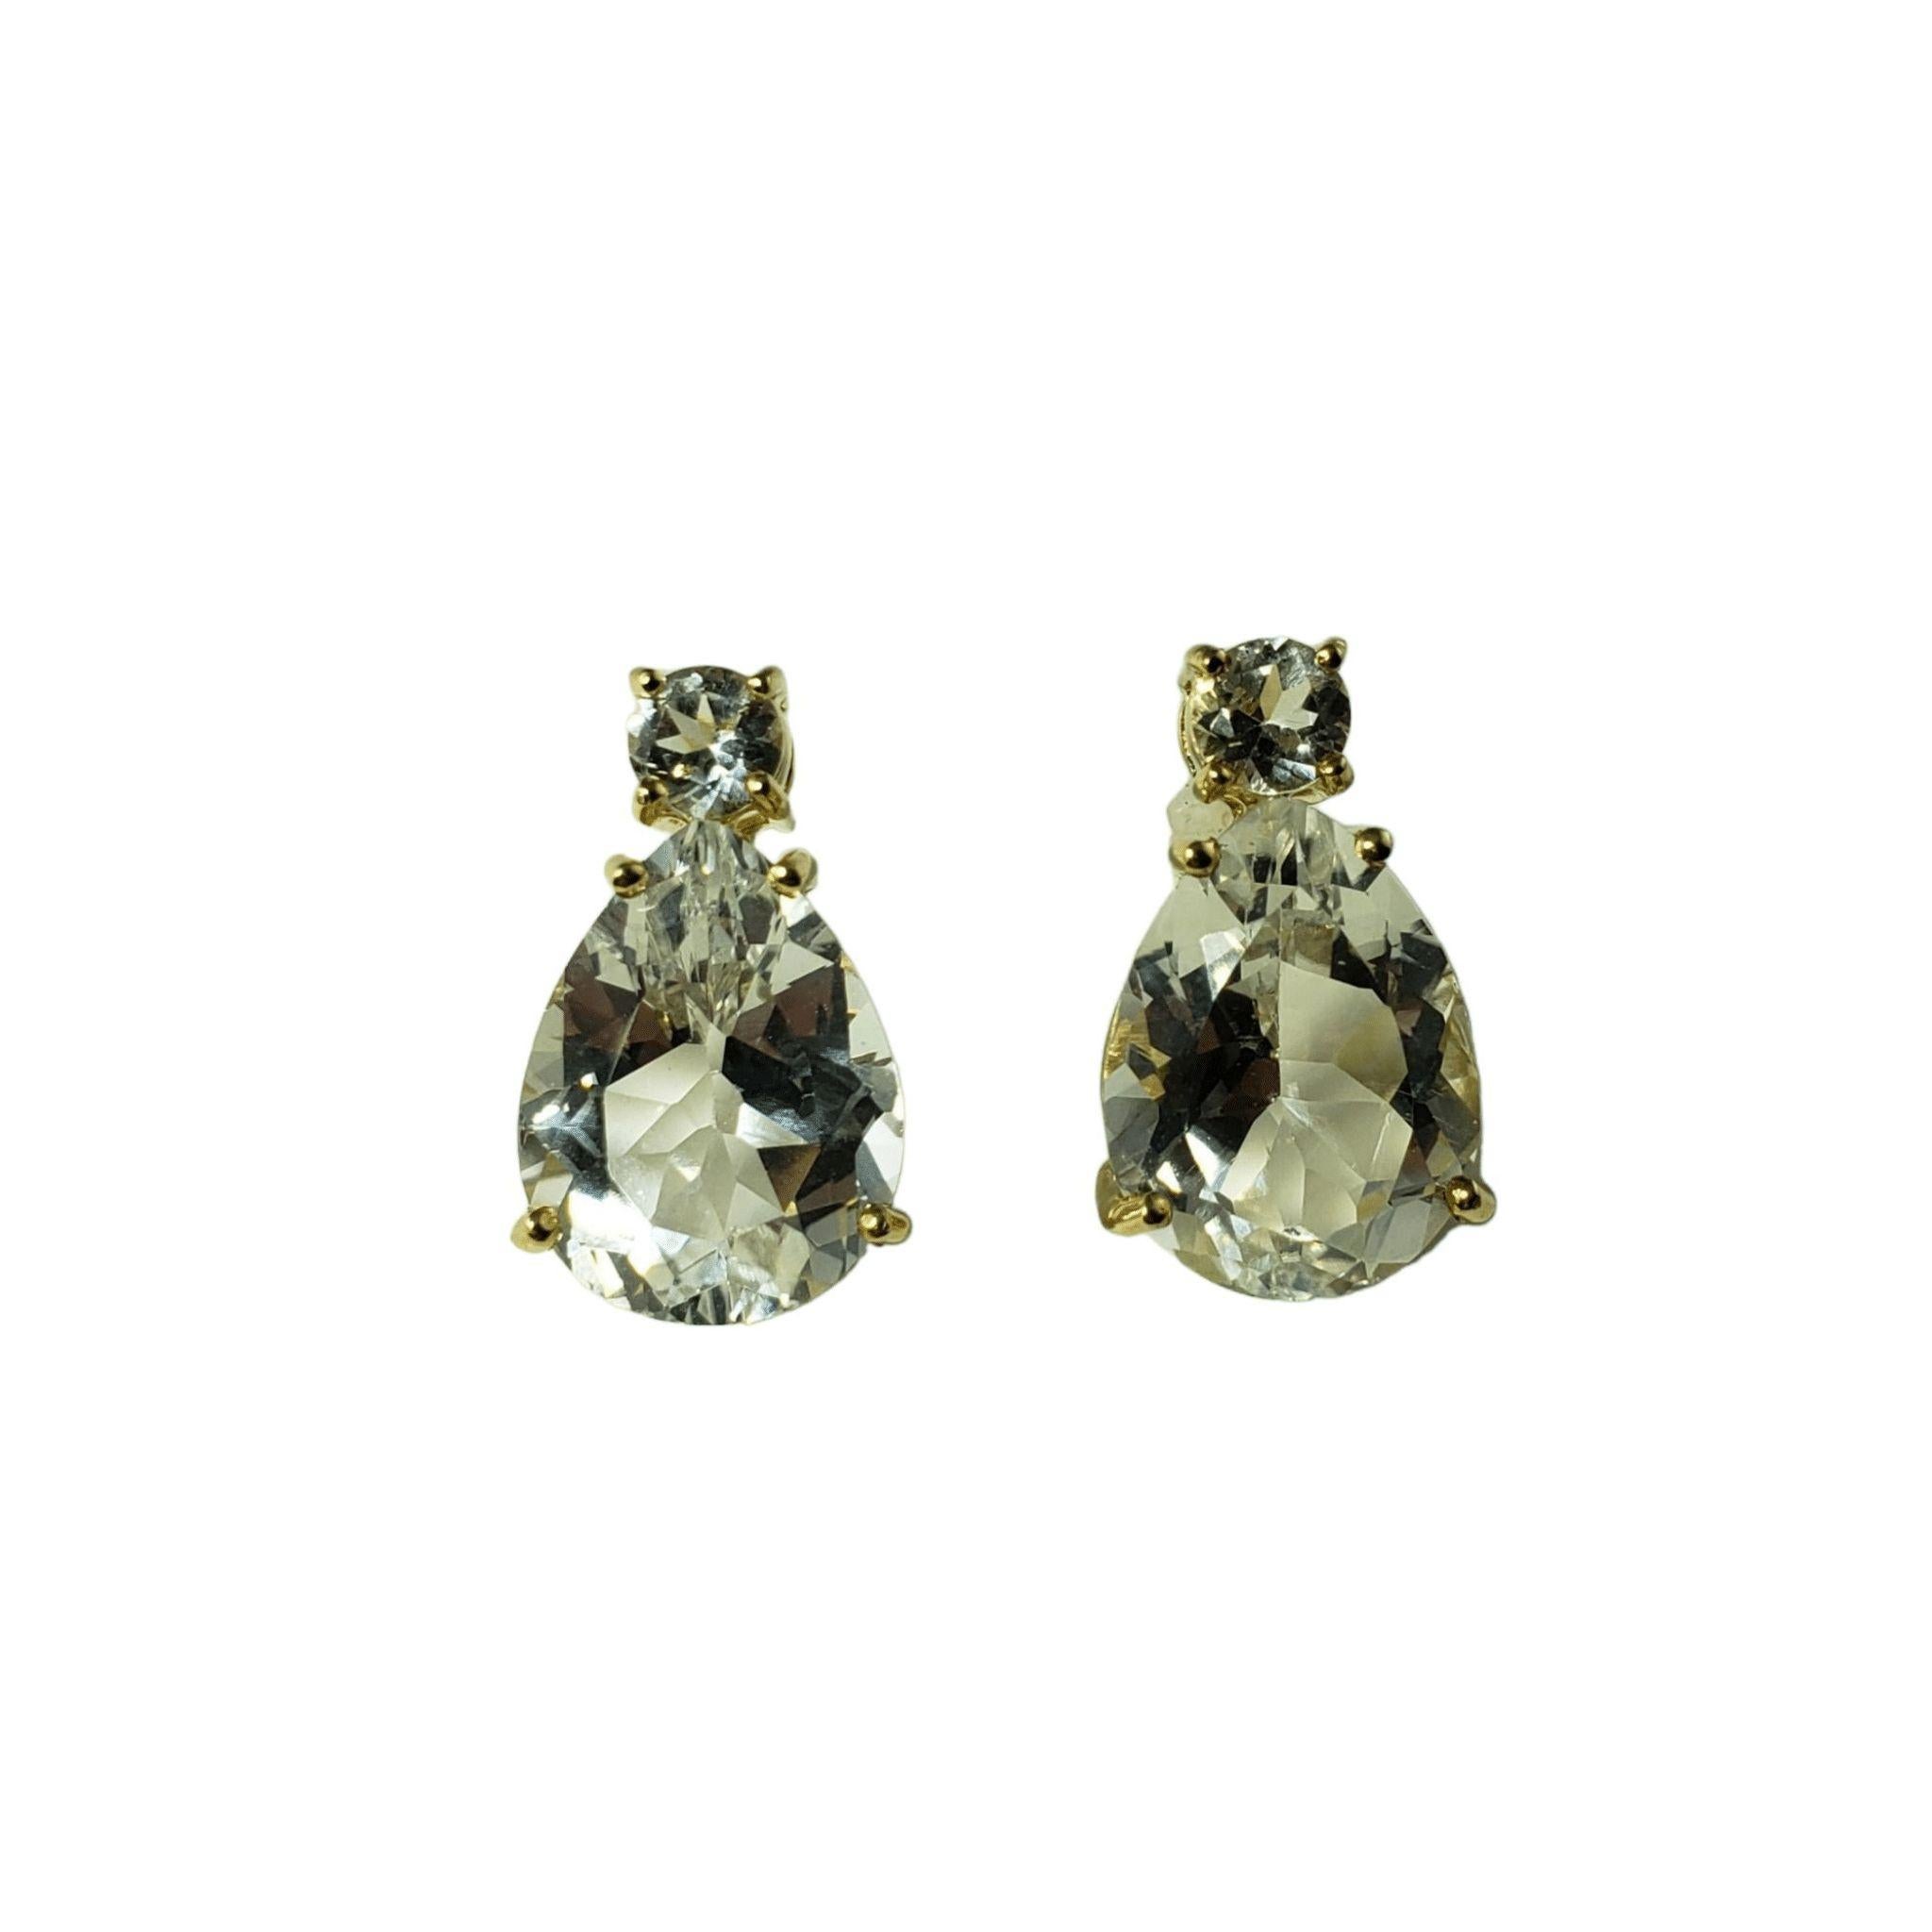 Vintage 10 Karat Yellow Gold and White Topaz Earrings JAGi Certified-

These elegant earrings each feature one pear cut white topaz (16 mm x 12 mm) and one round cut white topaz (5 mm) set in classic 10K yellow gold.

Total topaz weight: 22.04